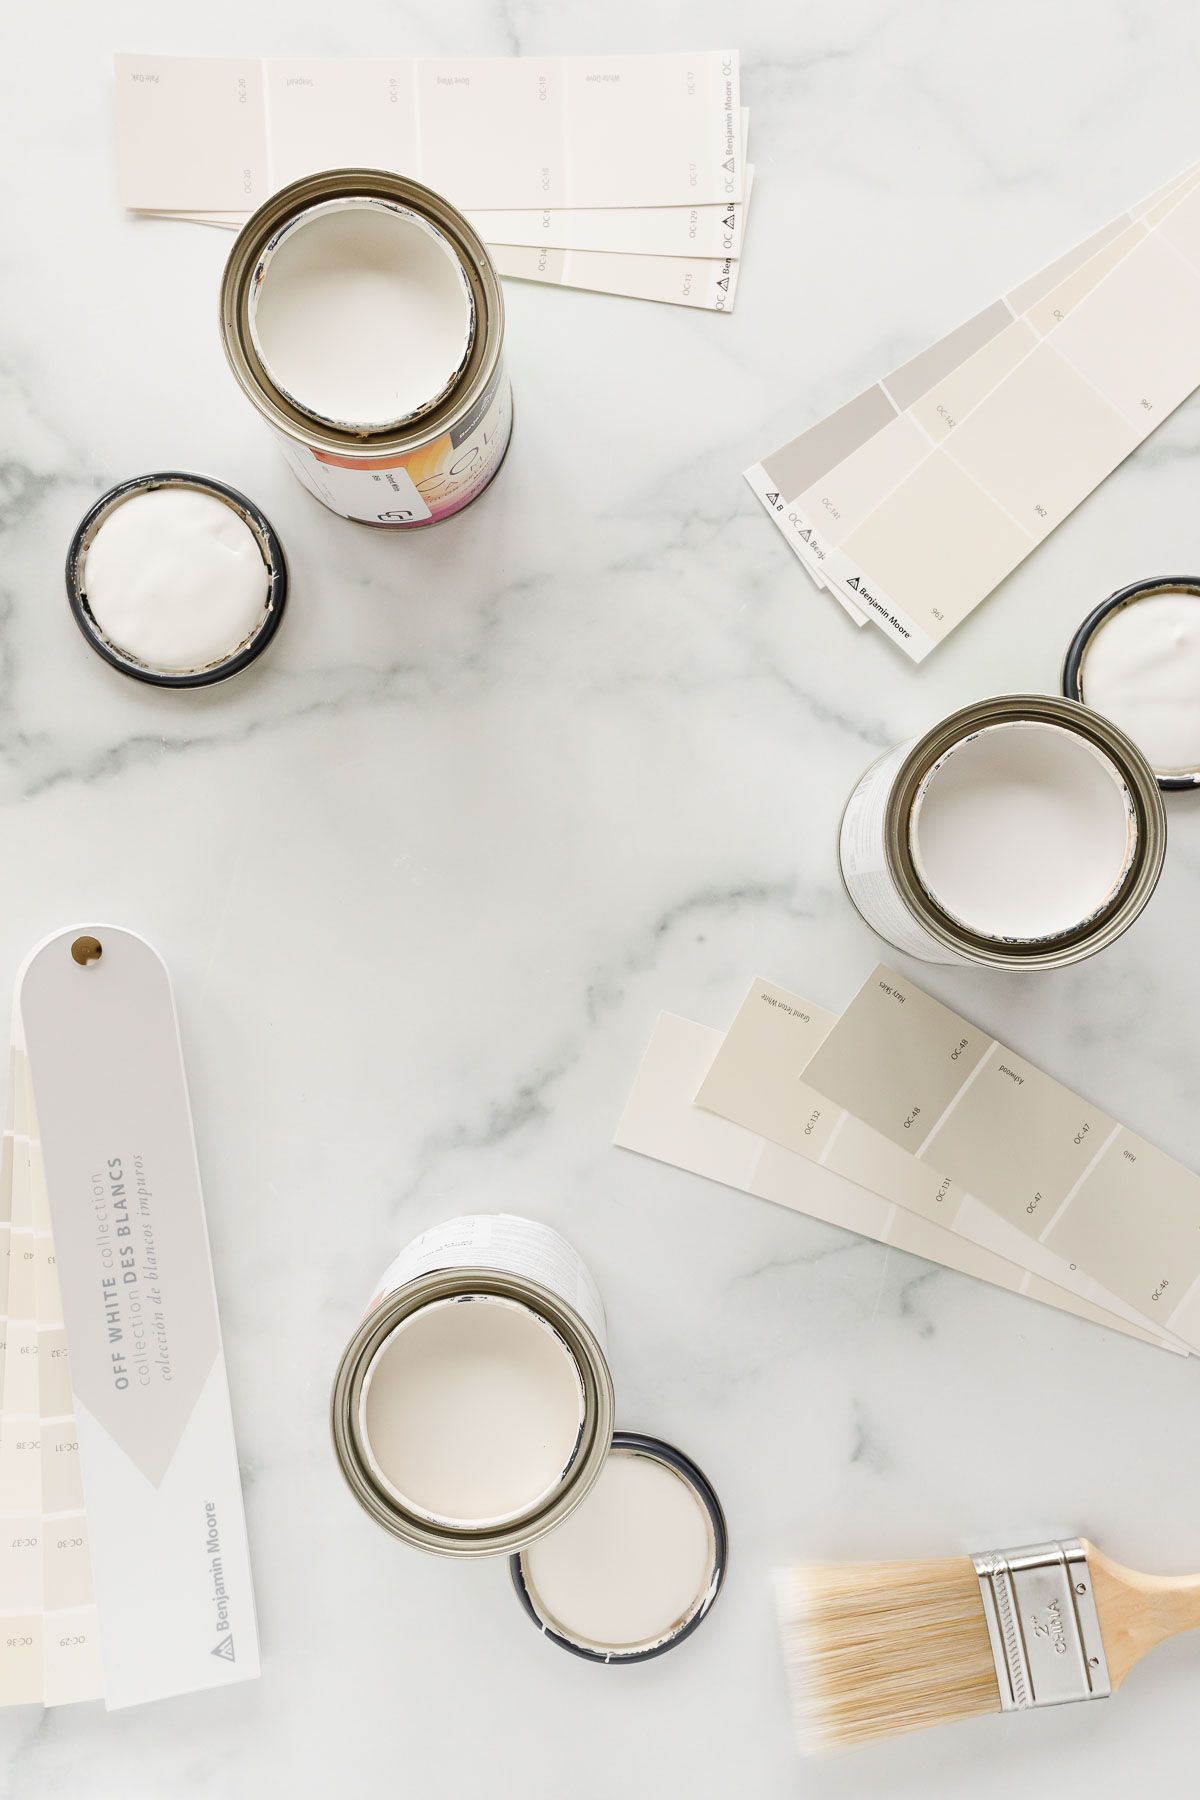 Paint samples and paint swatches in shades of cream on a marble countertop